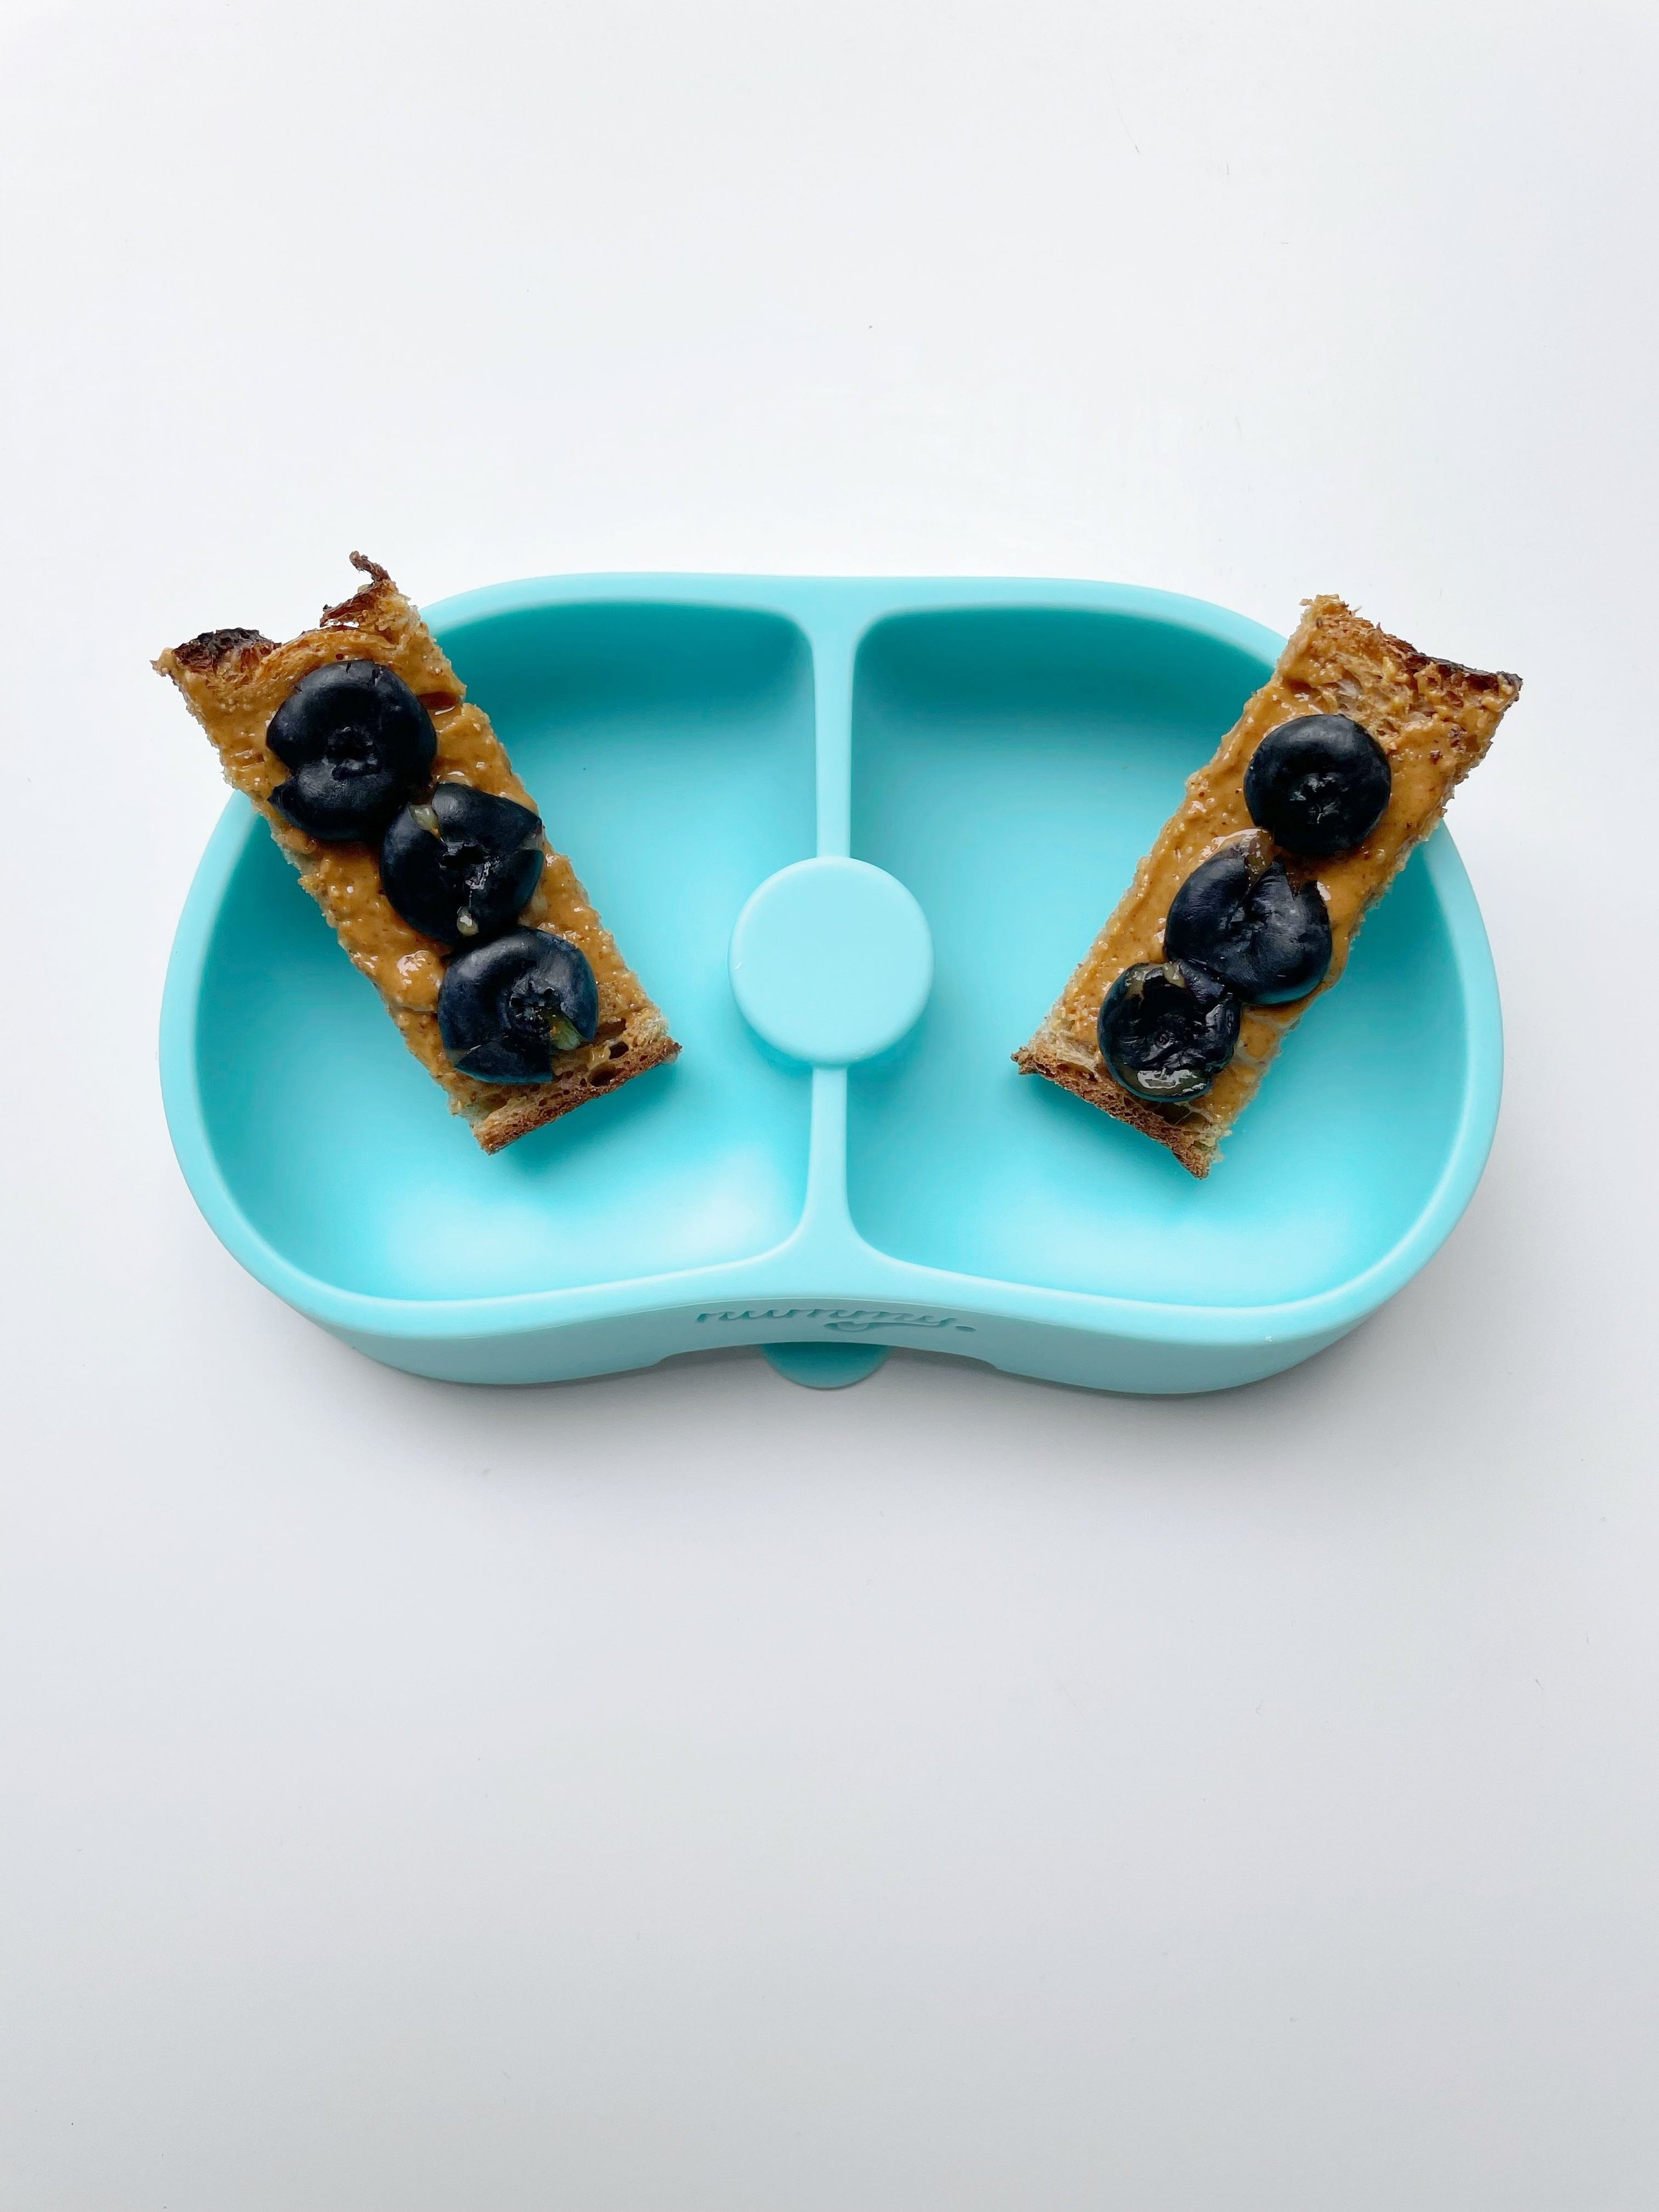 Find more baby toast ideas here!